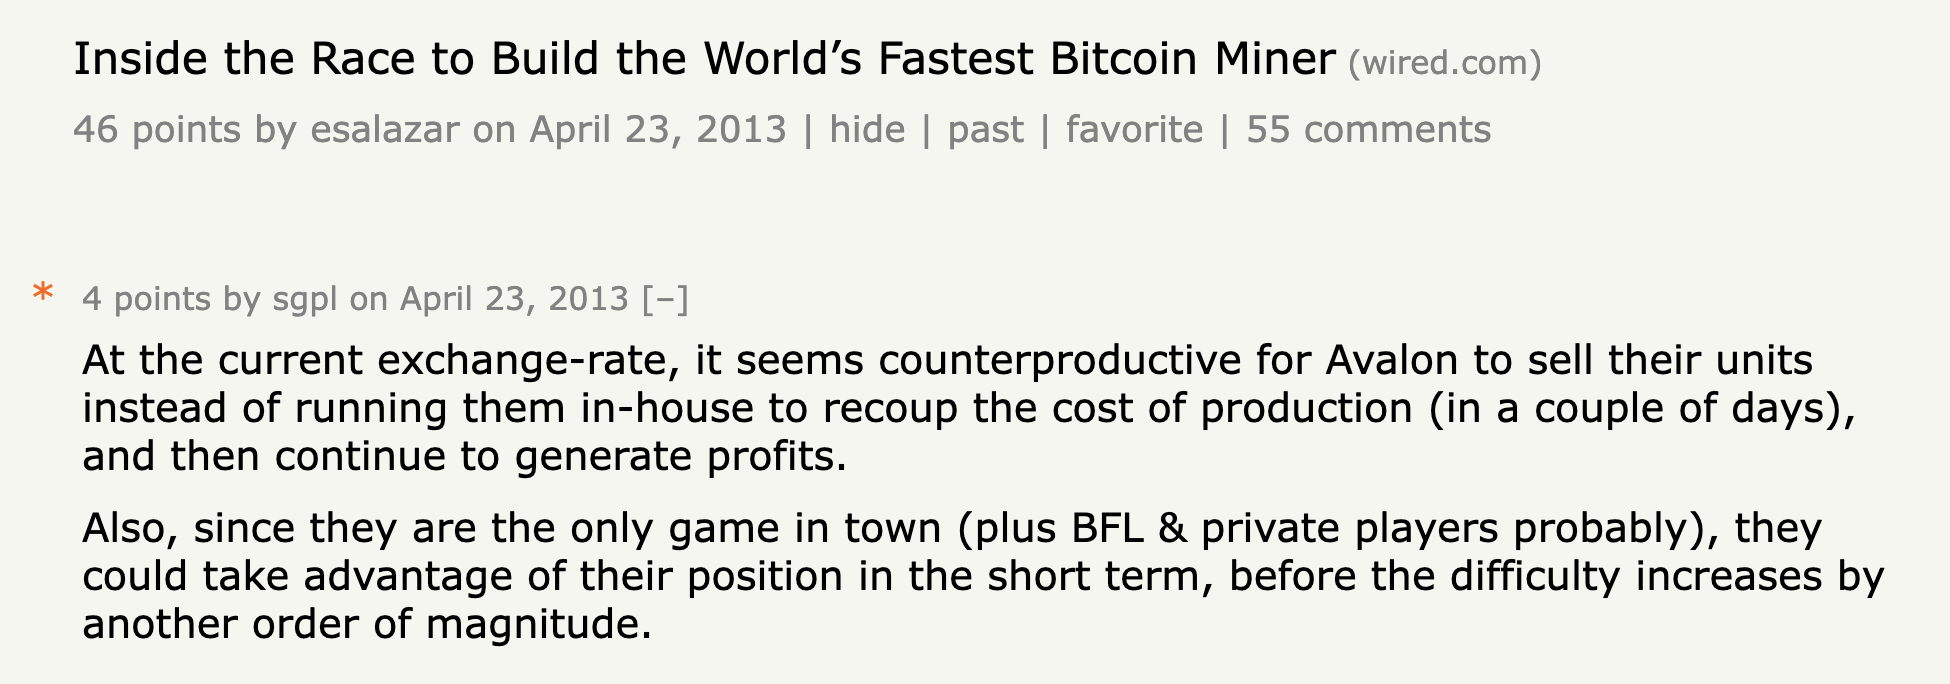 A comment by sgpl on hacker news circa 2013